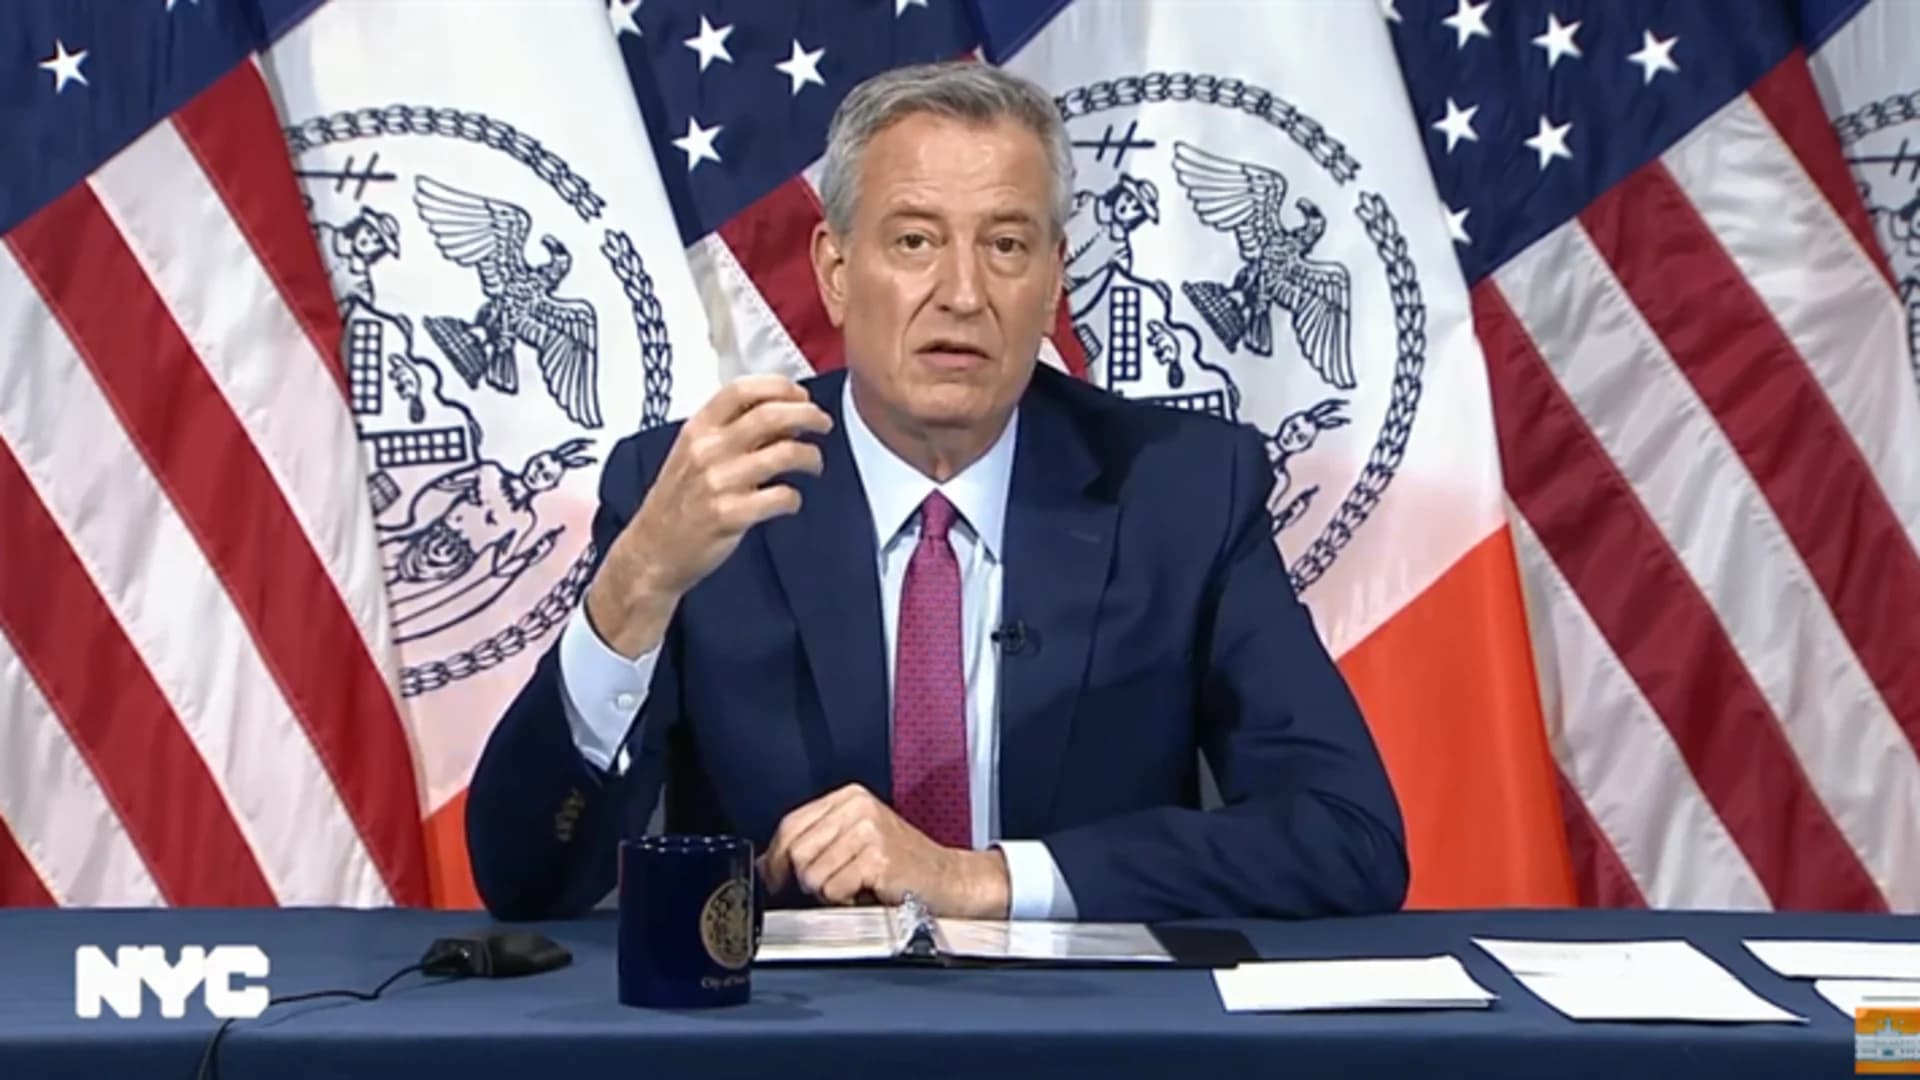 Mayor de Blasio urges peaceful protests in NYC over death of George Floyd